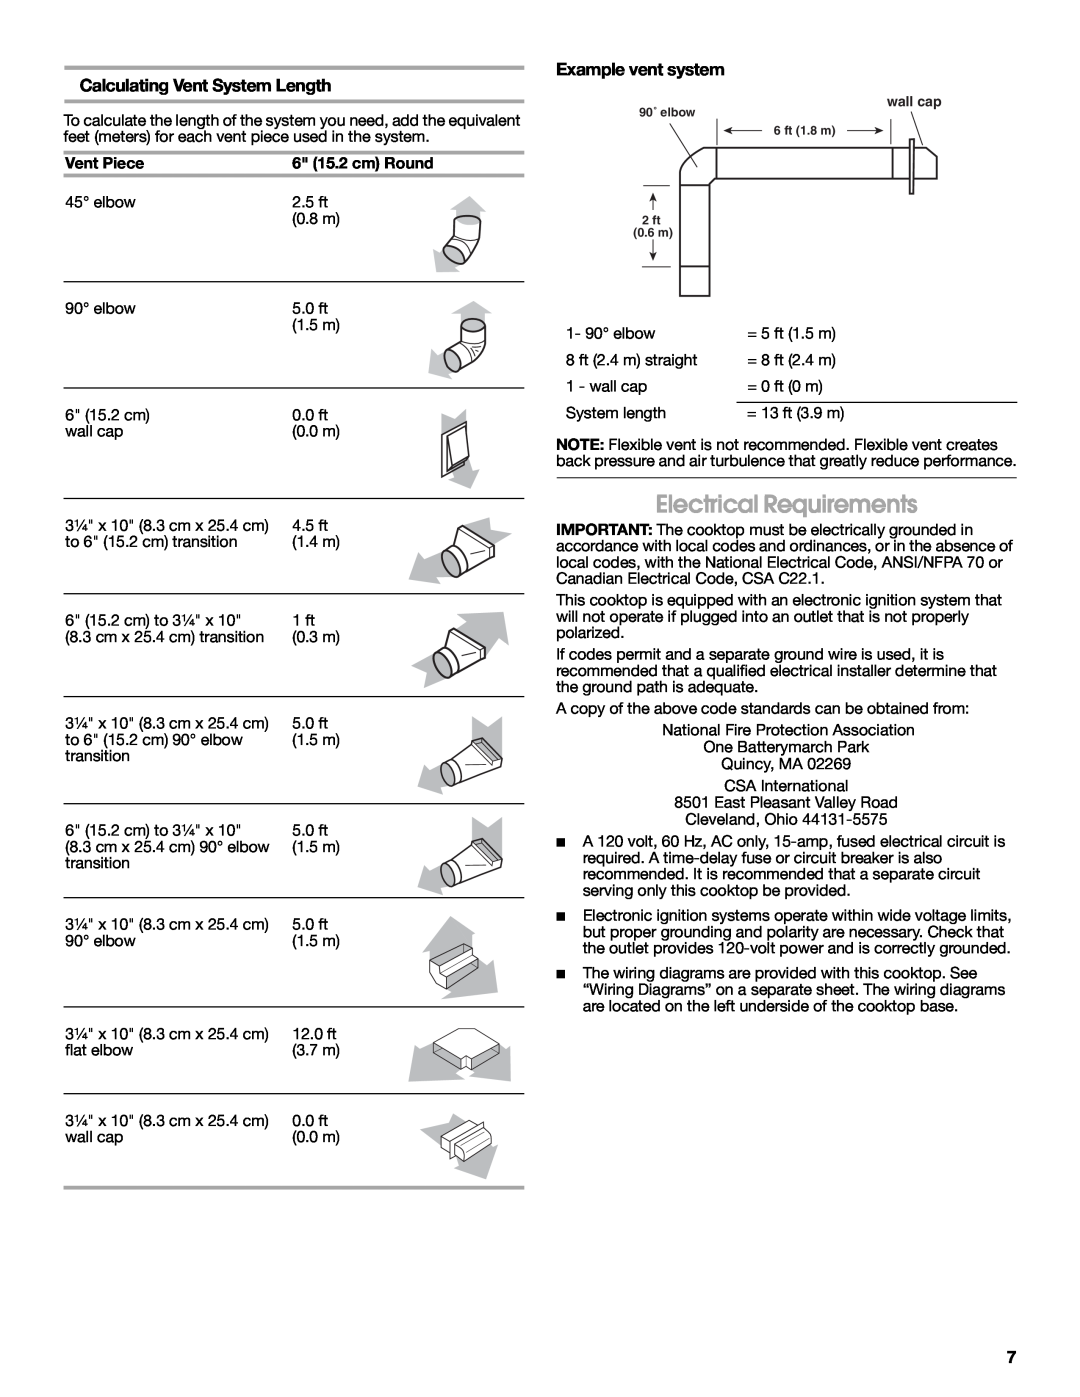 Jenn-Air W10197058B Electrical Requirements, Calculating Vent System Length, Example vent system, Vent Piece 